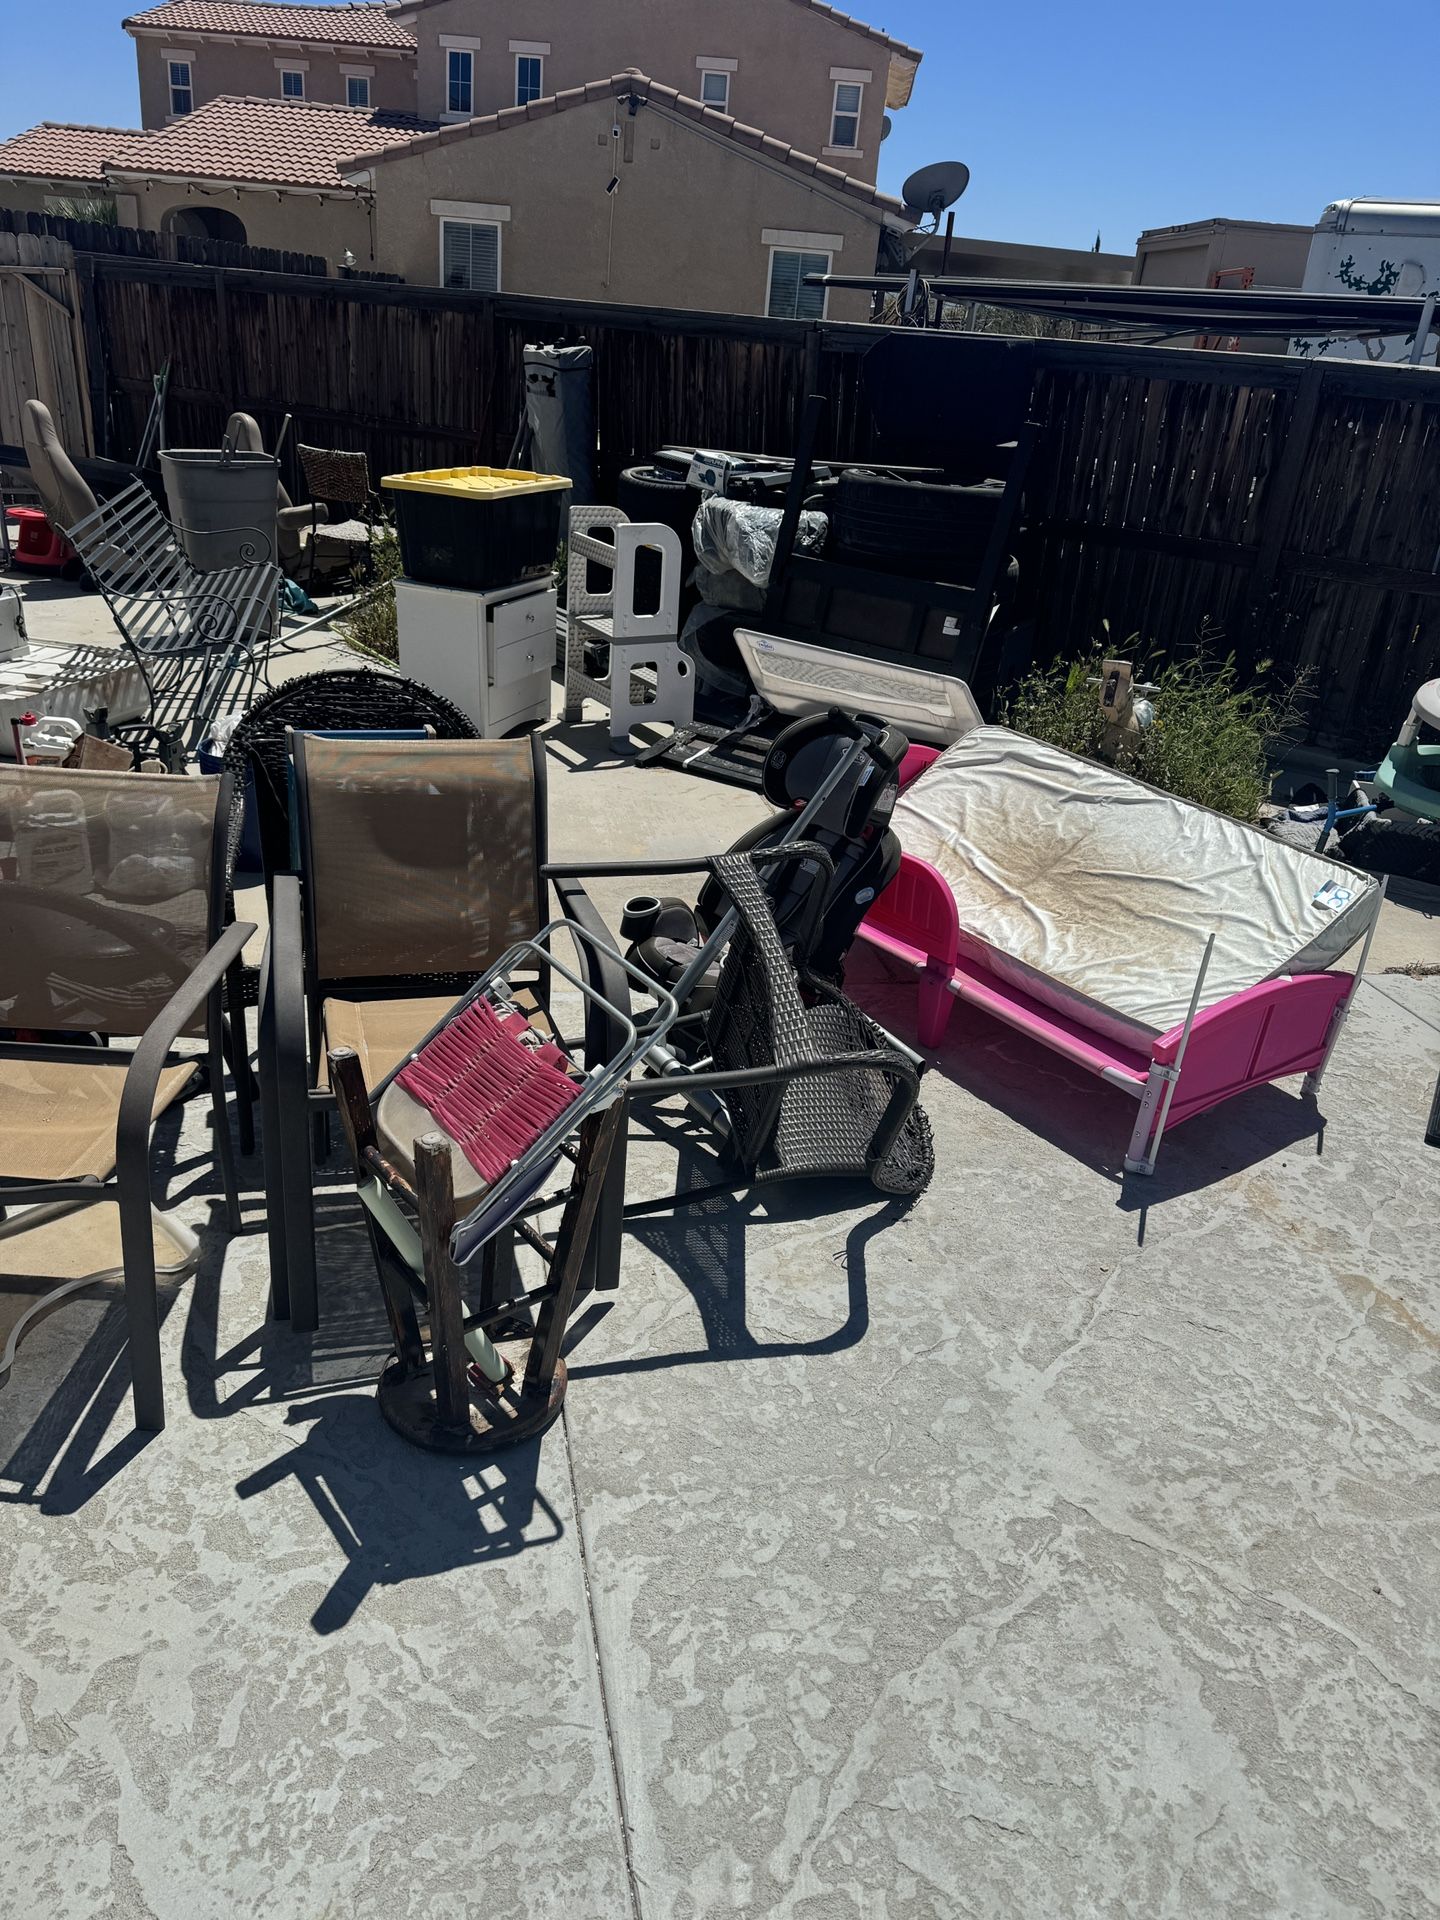 yard sale - if you want it come get it